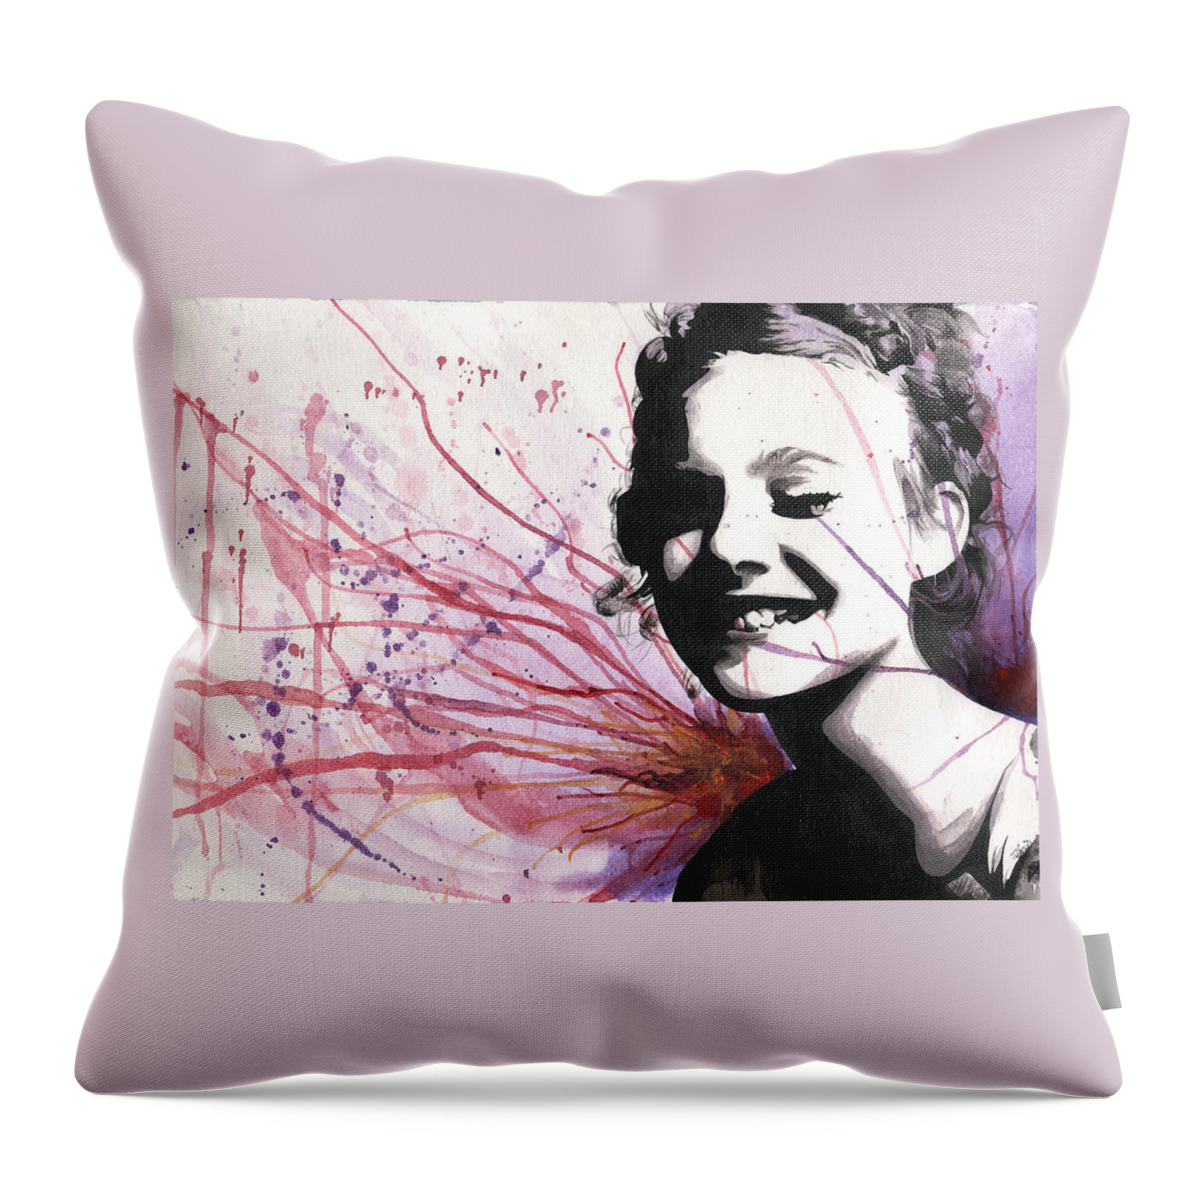 Portrait Throw Pillow featuring the painting Fireworks Girl by Tiffany DiGiacomo